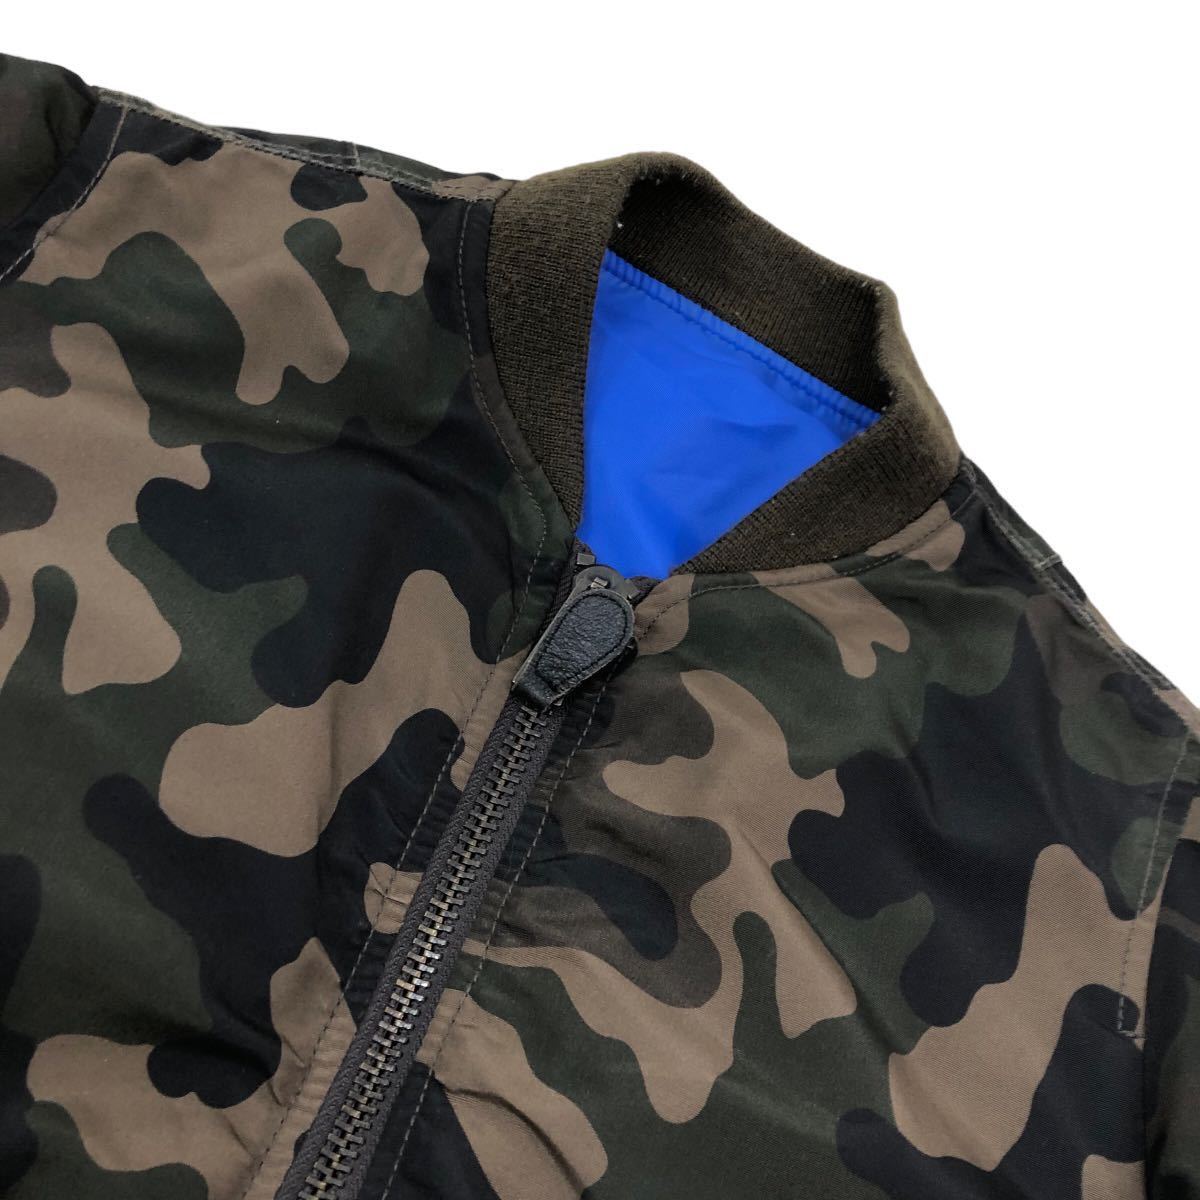 S159 AVIREX Avirex MA-1 reversible 2way jacket blouson outer jumper outer garment lady's M camouflage camouflage blue 